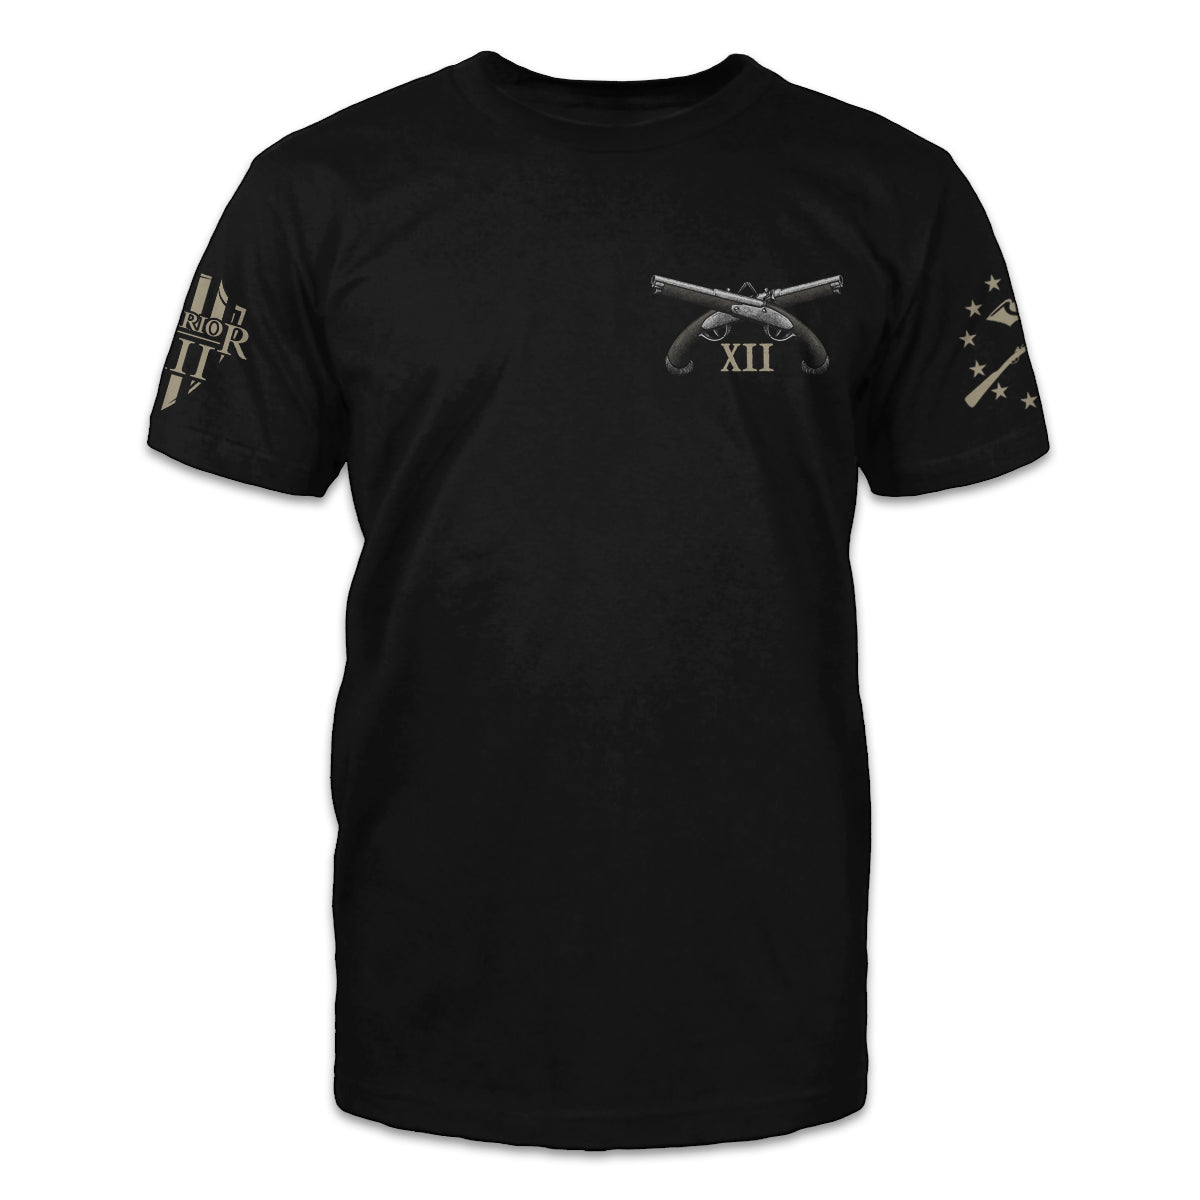 A black t-shirt with two pistols crossed over and the roman numerals XII printed on the front.